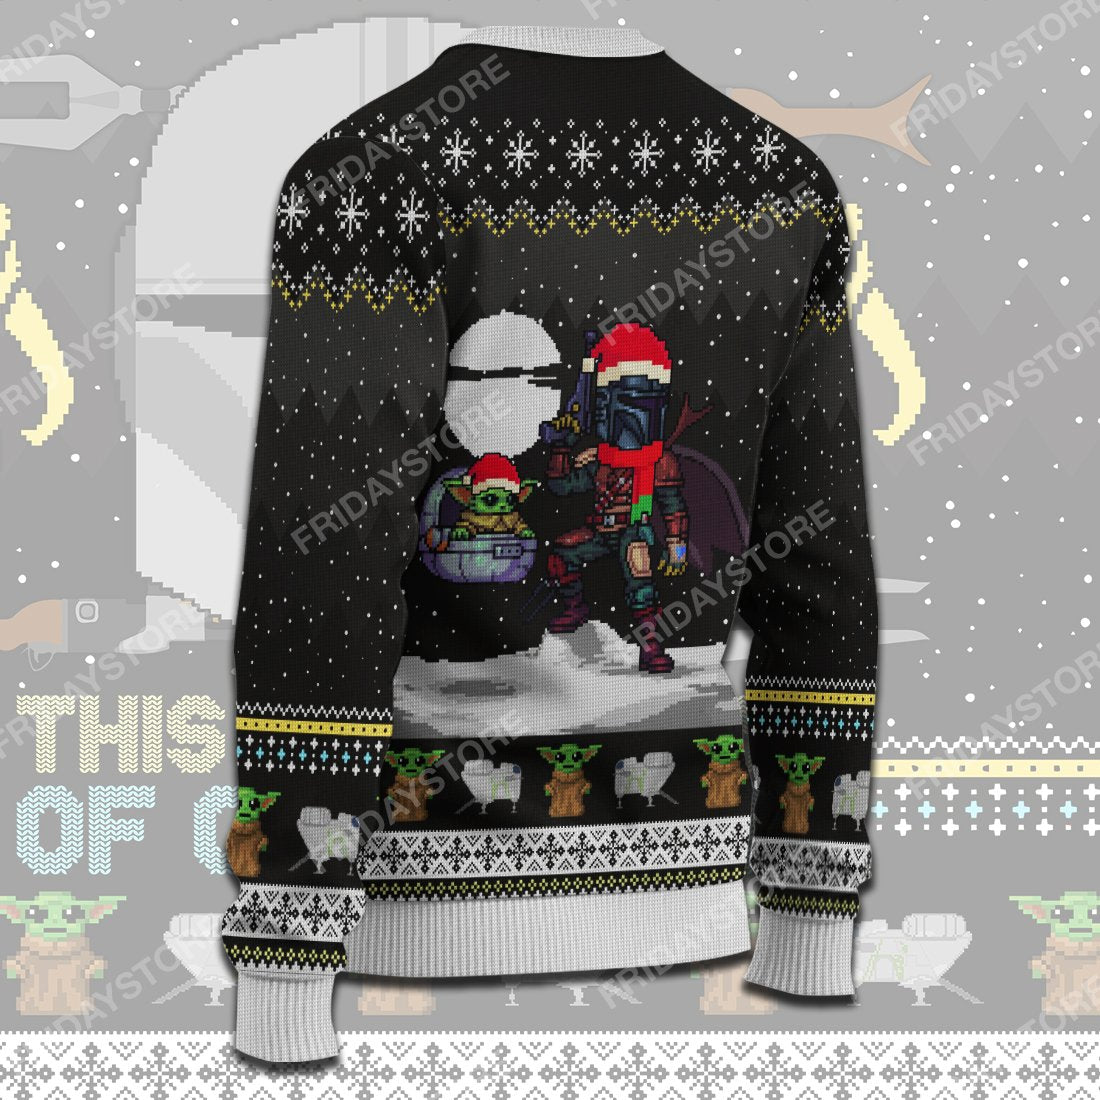 SW This Is The Way Of Christmas Sweater